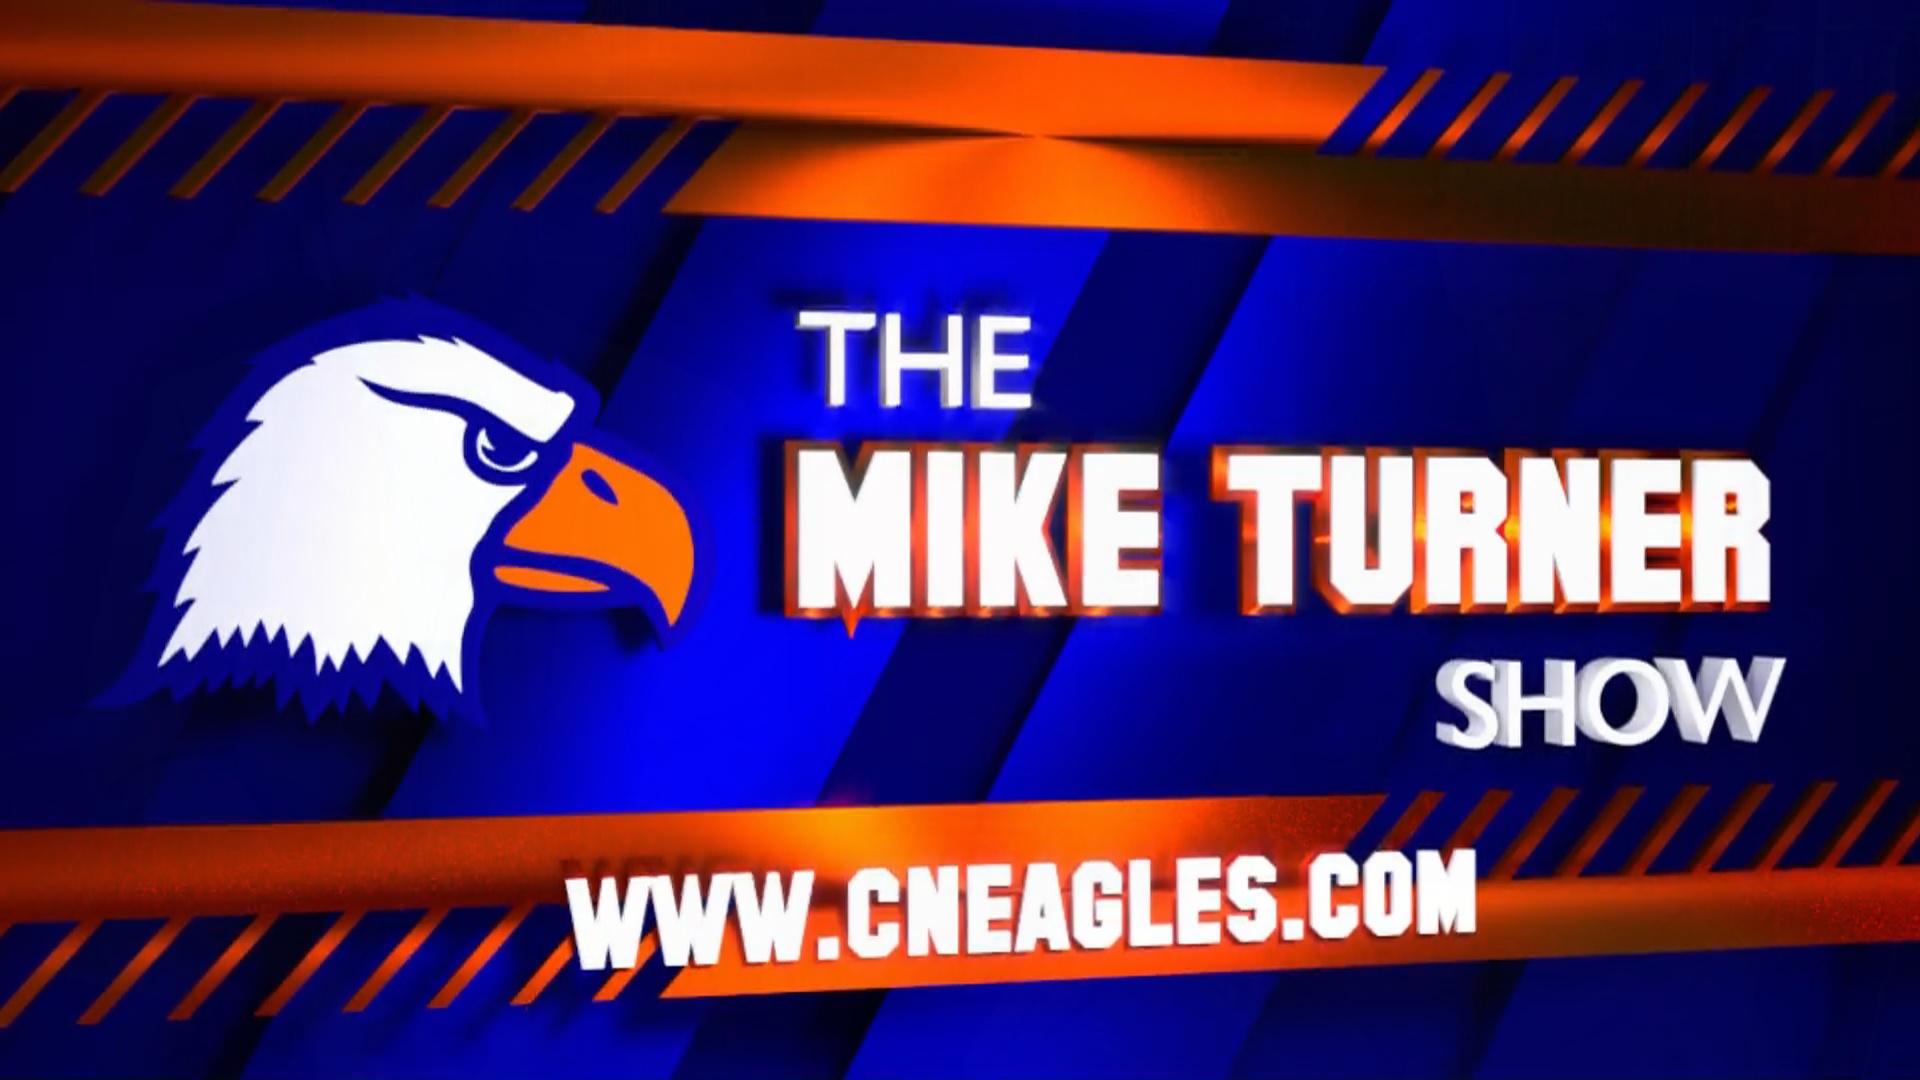 Week six of The Mike Turner Show available online